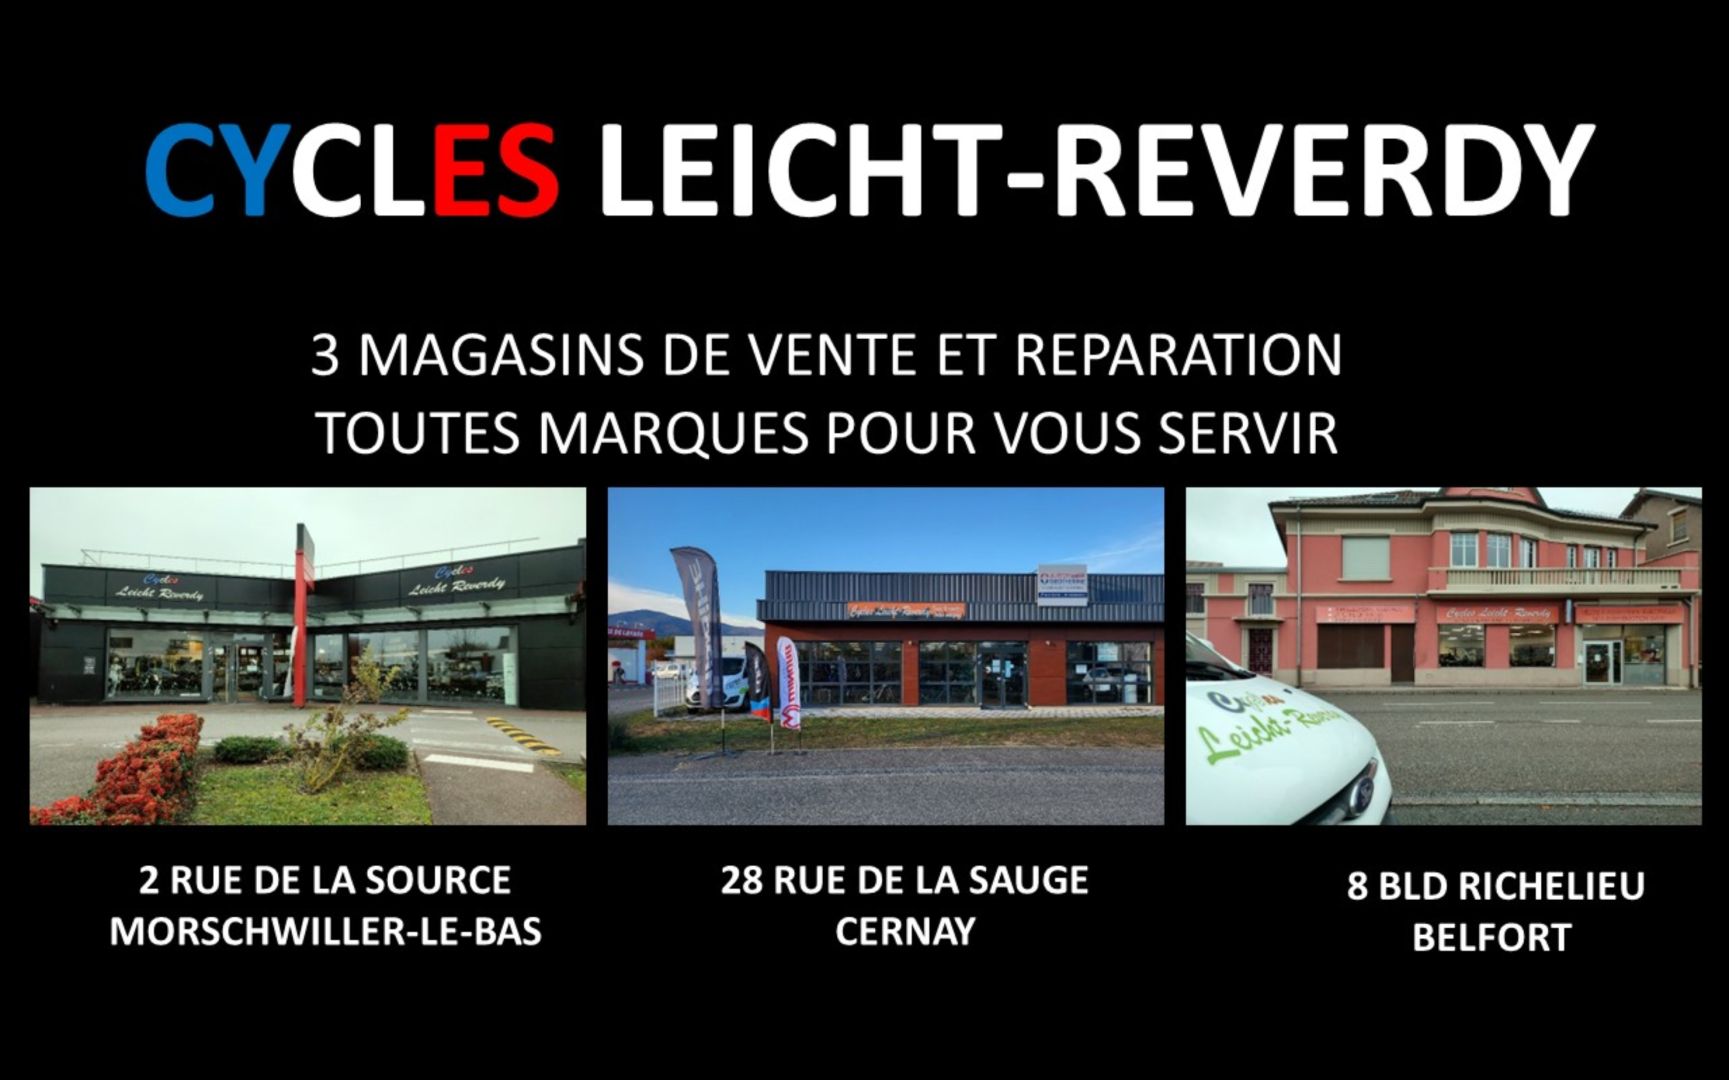 CYCLES LEICHT REVERDY